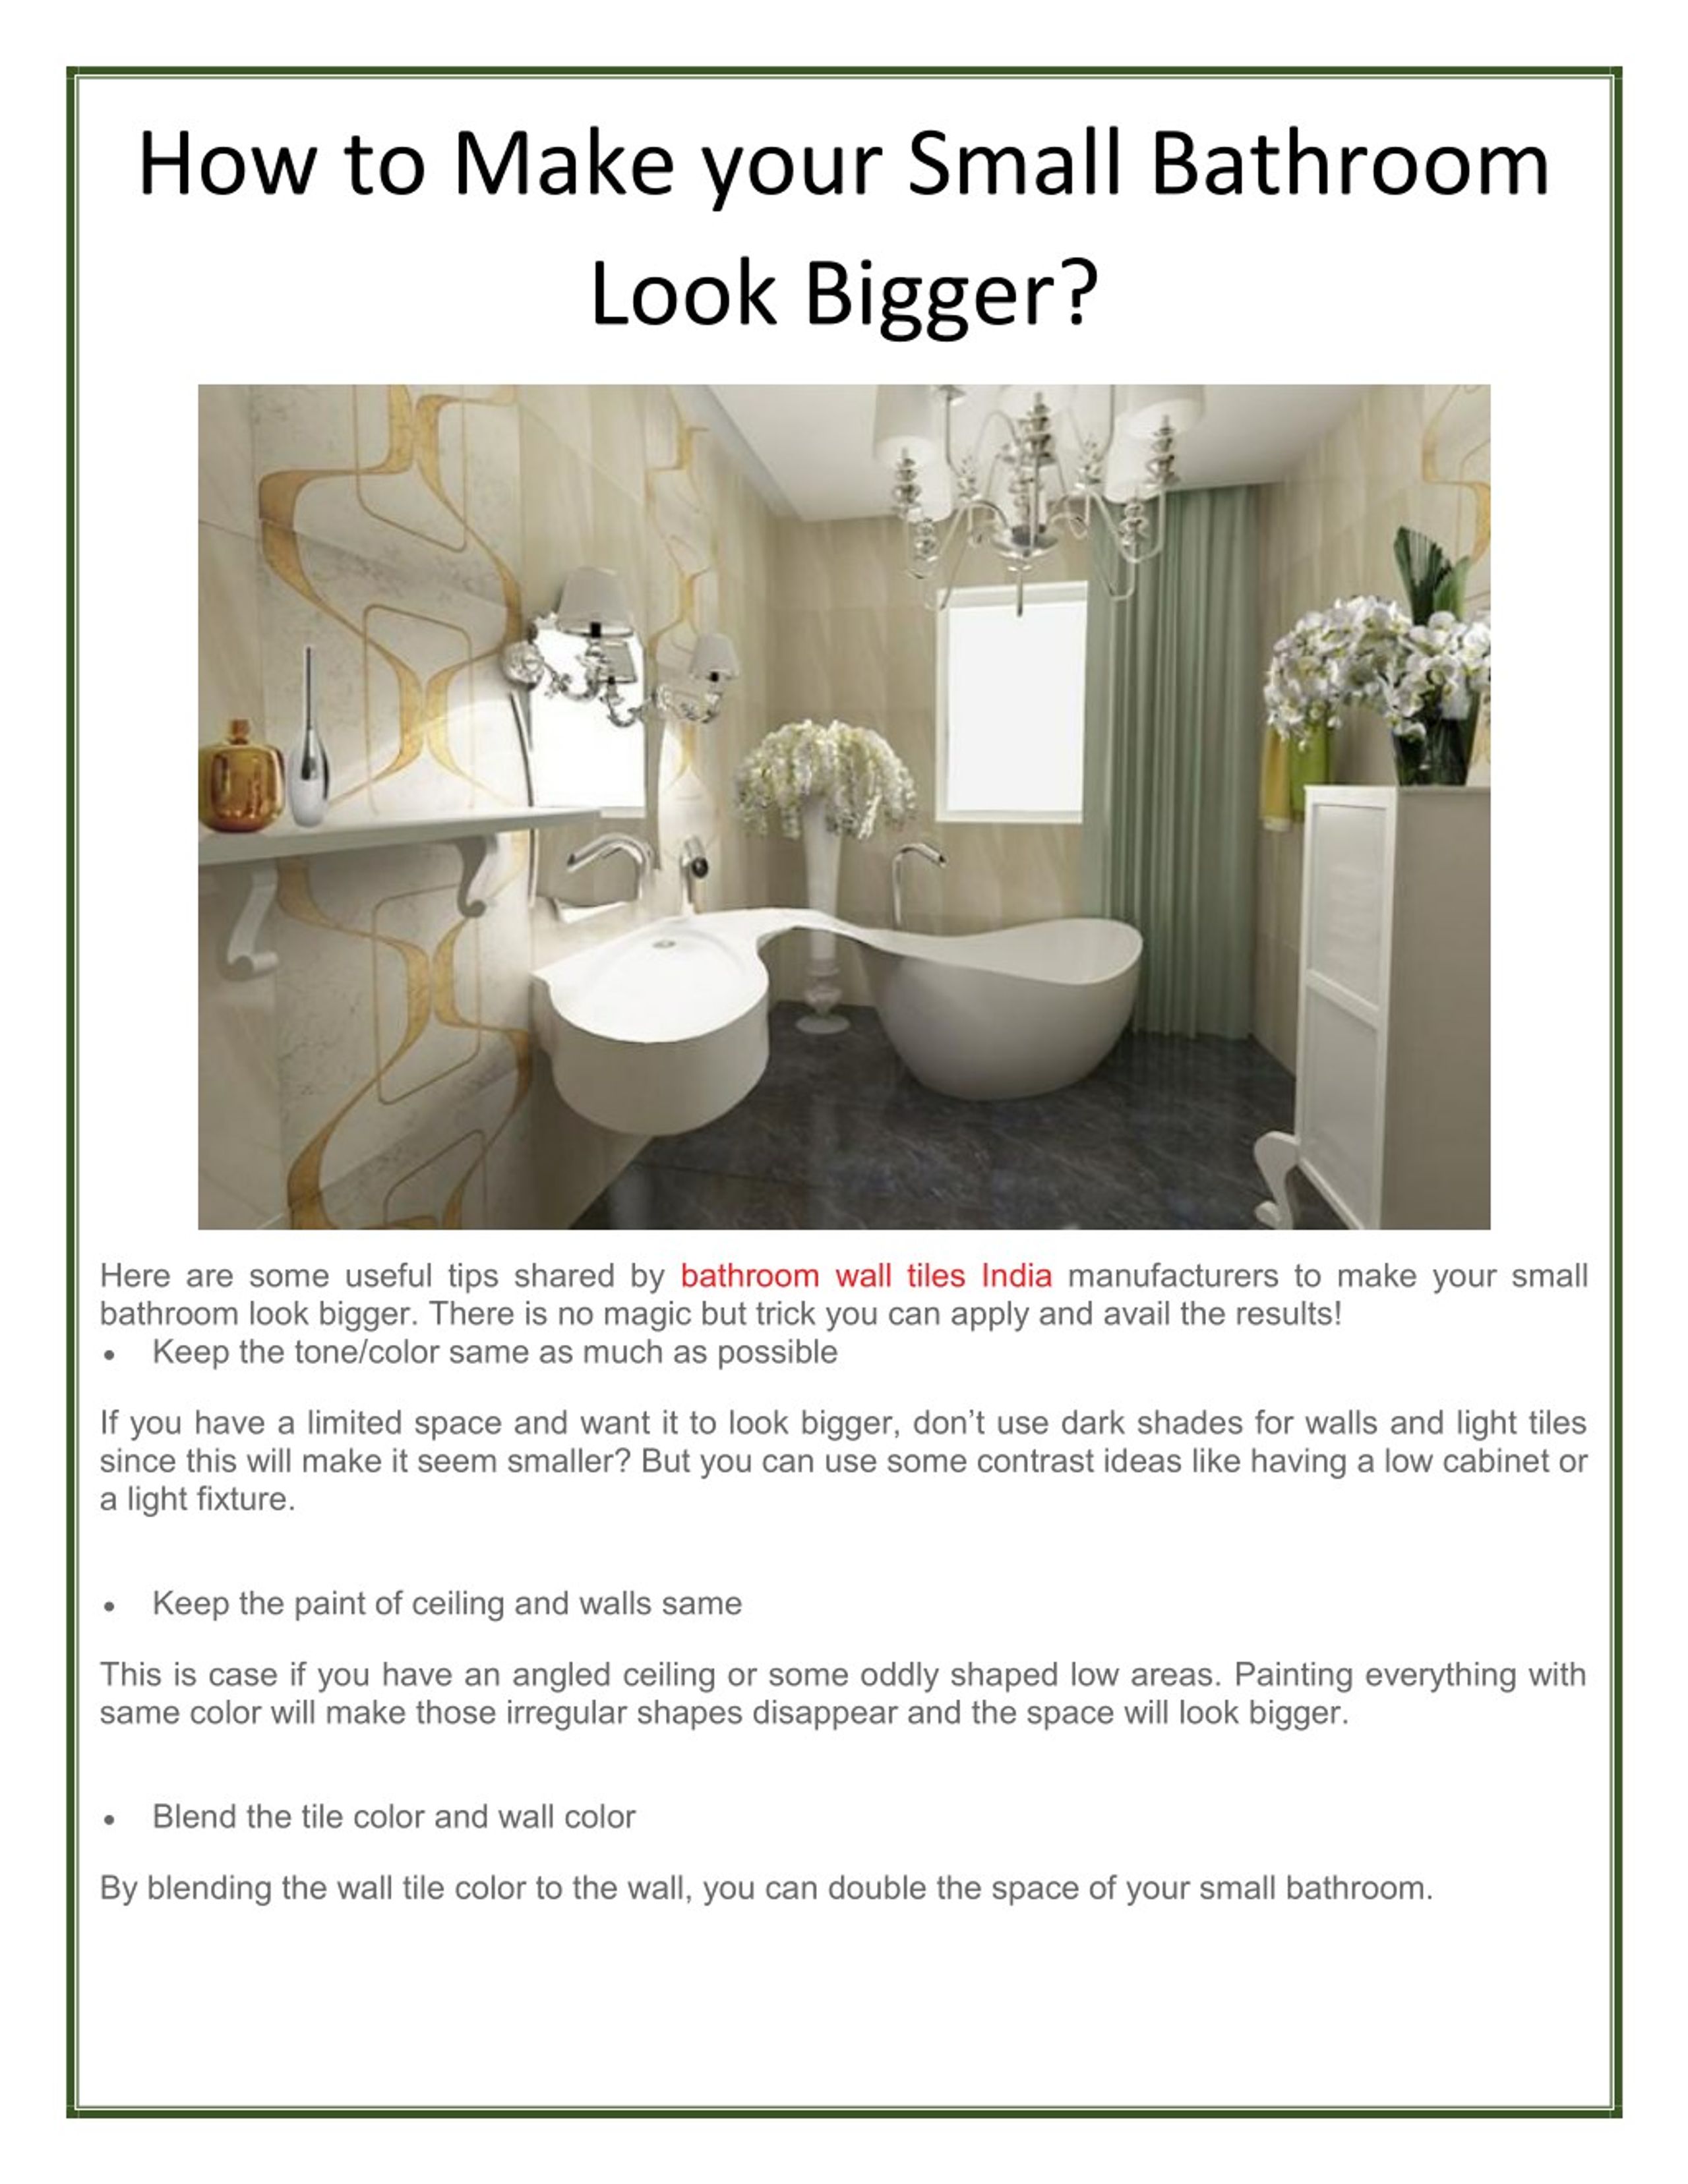 Ppt How To Make Your Small Bathroom Look Bigger